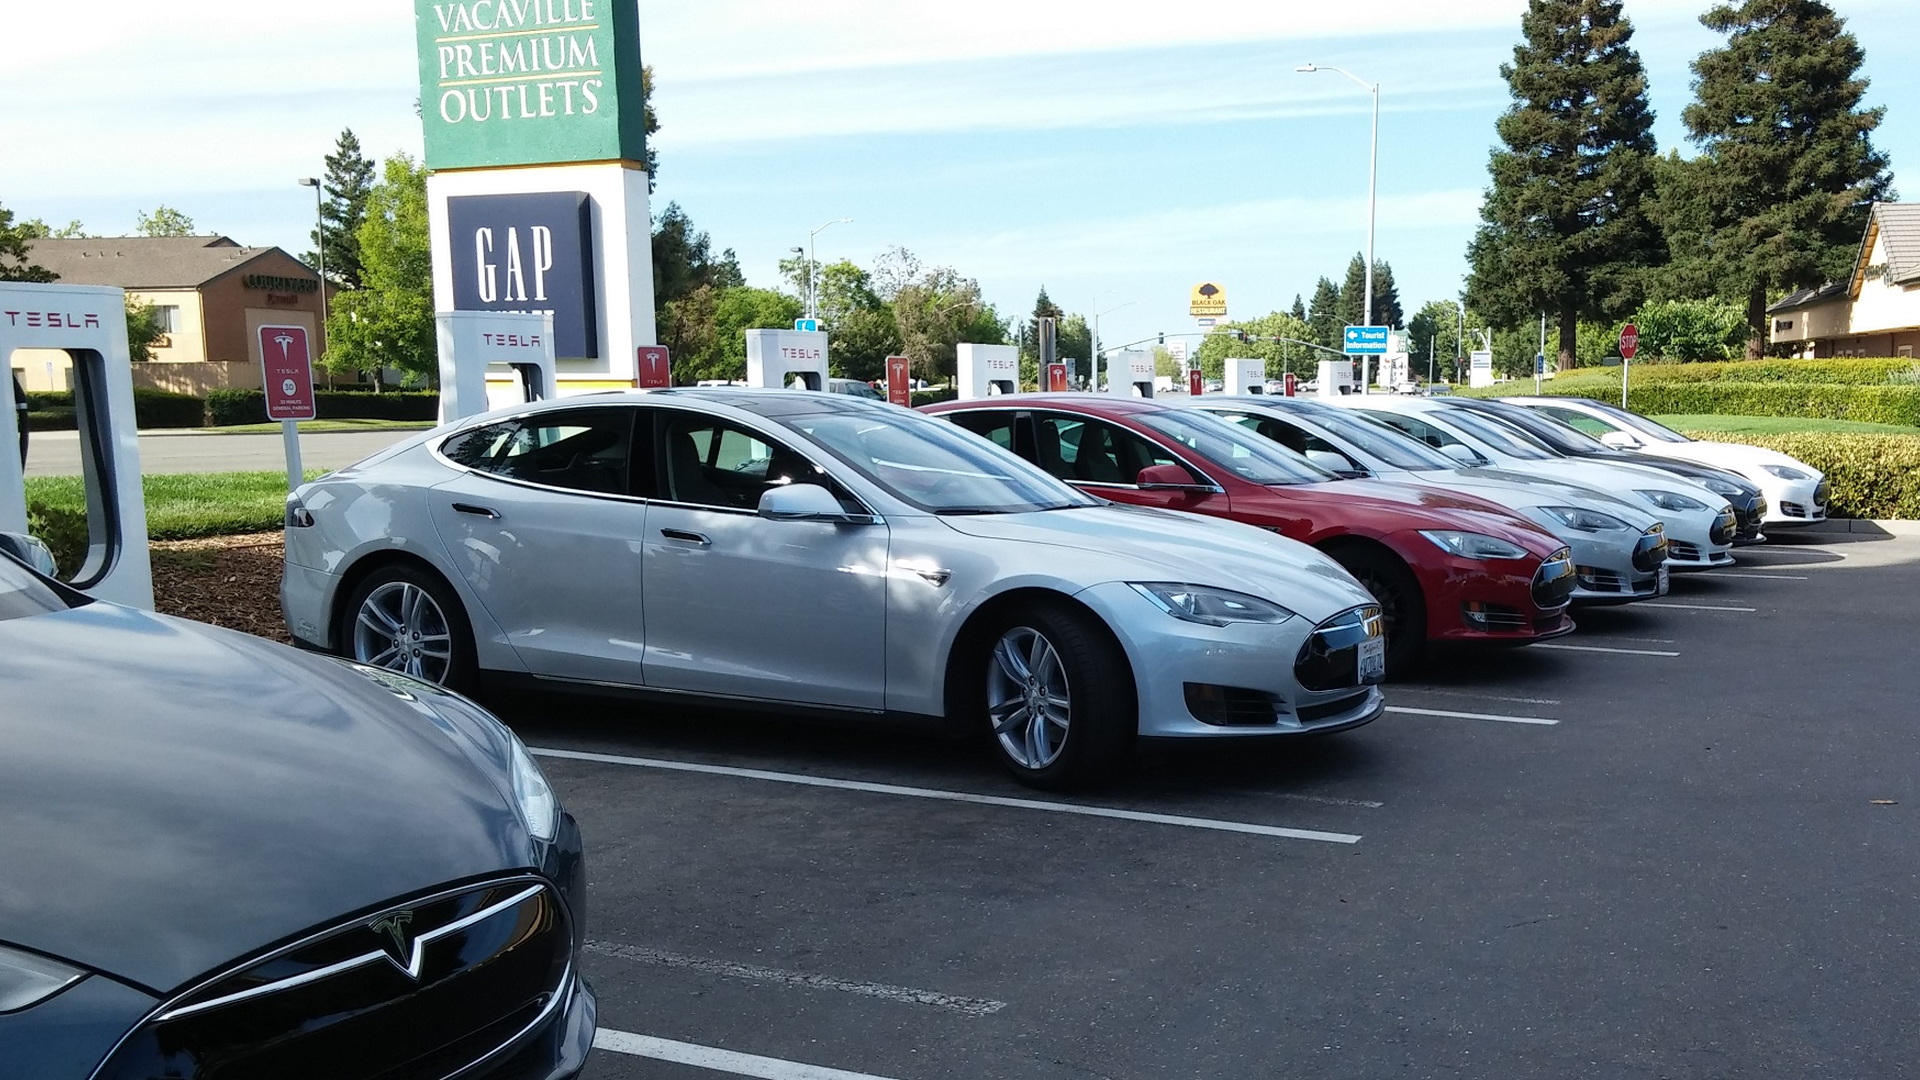 Tesla Supercharger site in Vacaville, California, before expansion    [photo: George Parrott]